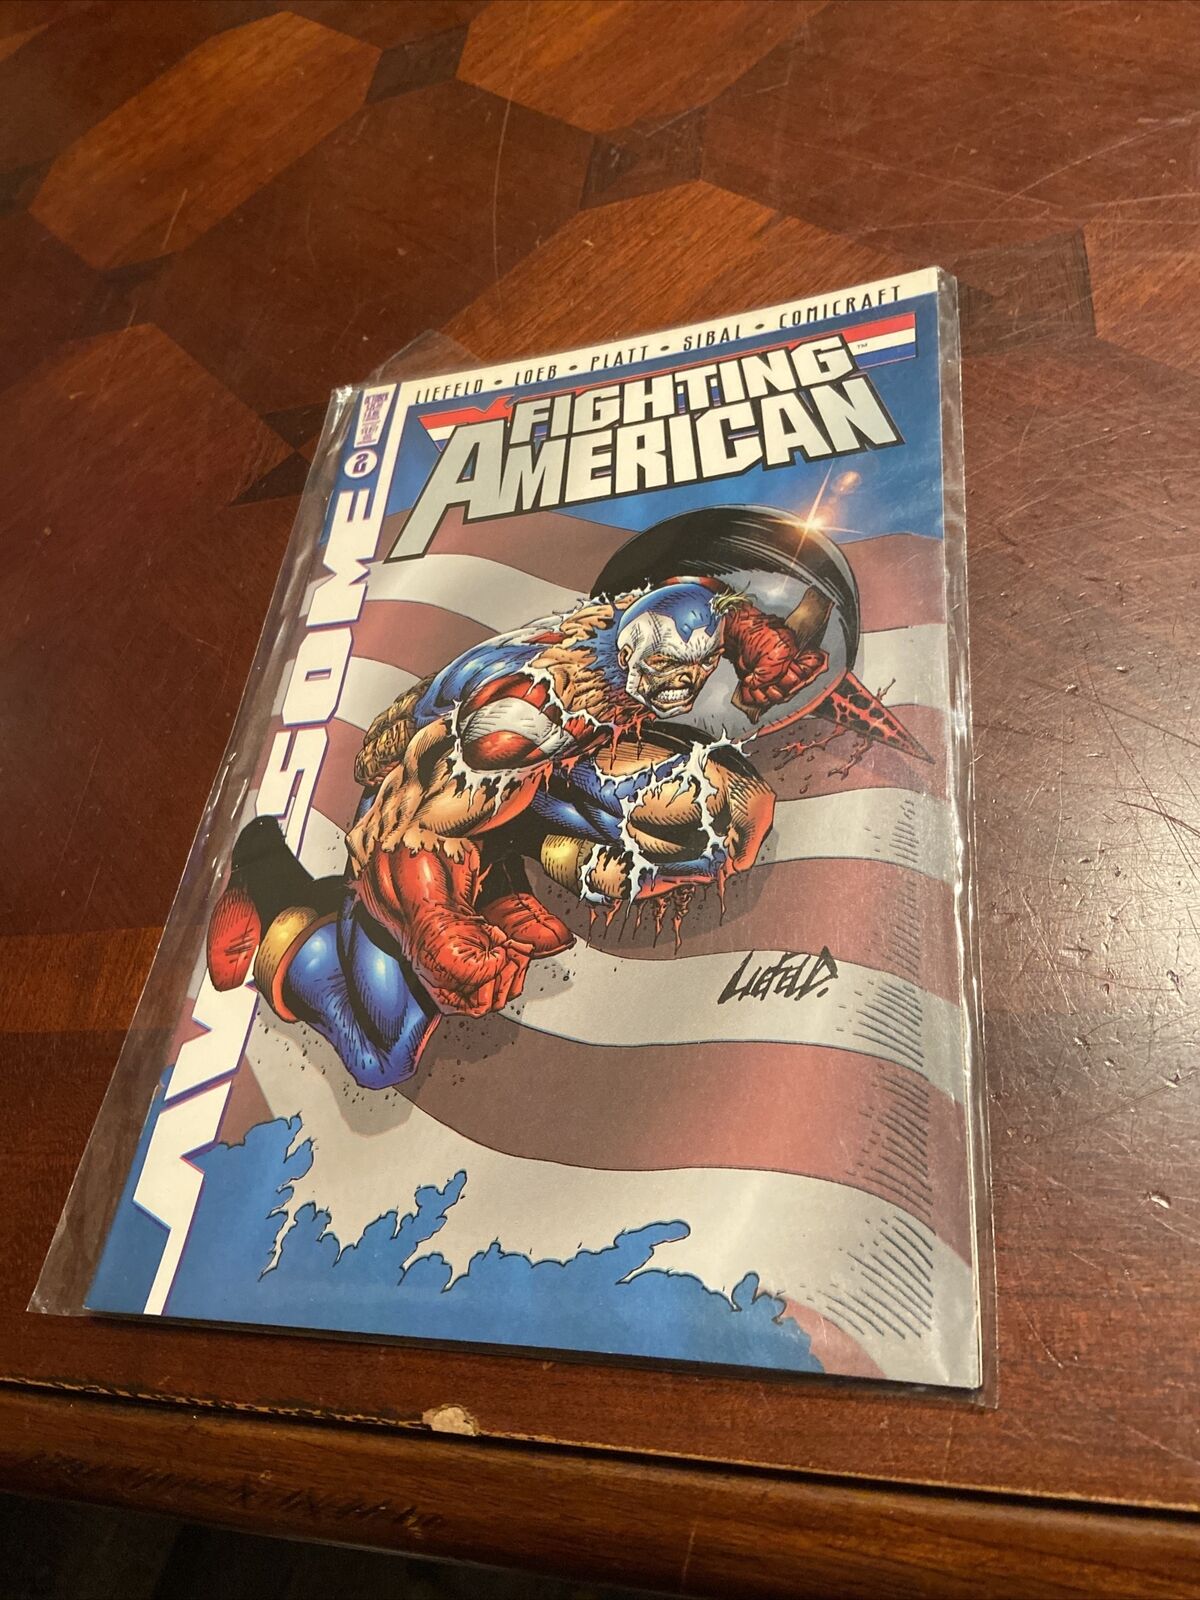 FIGHTING AMERICAN 2 RARE VARIANT ROB LIEFELD AWESOME ENT. COMICS 1997 VINTAGE